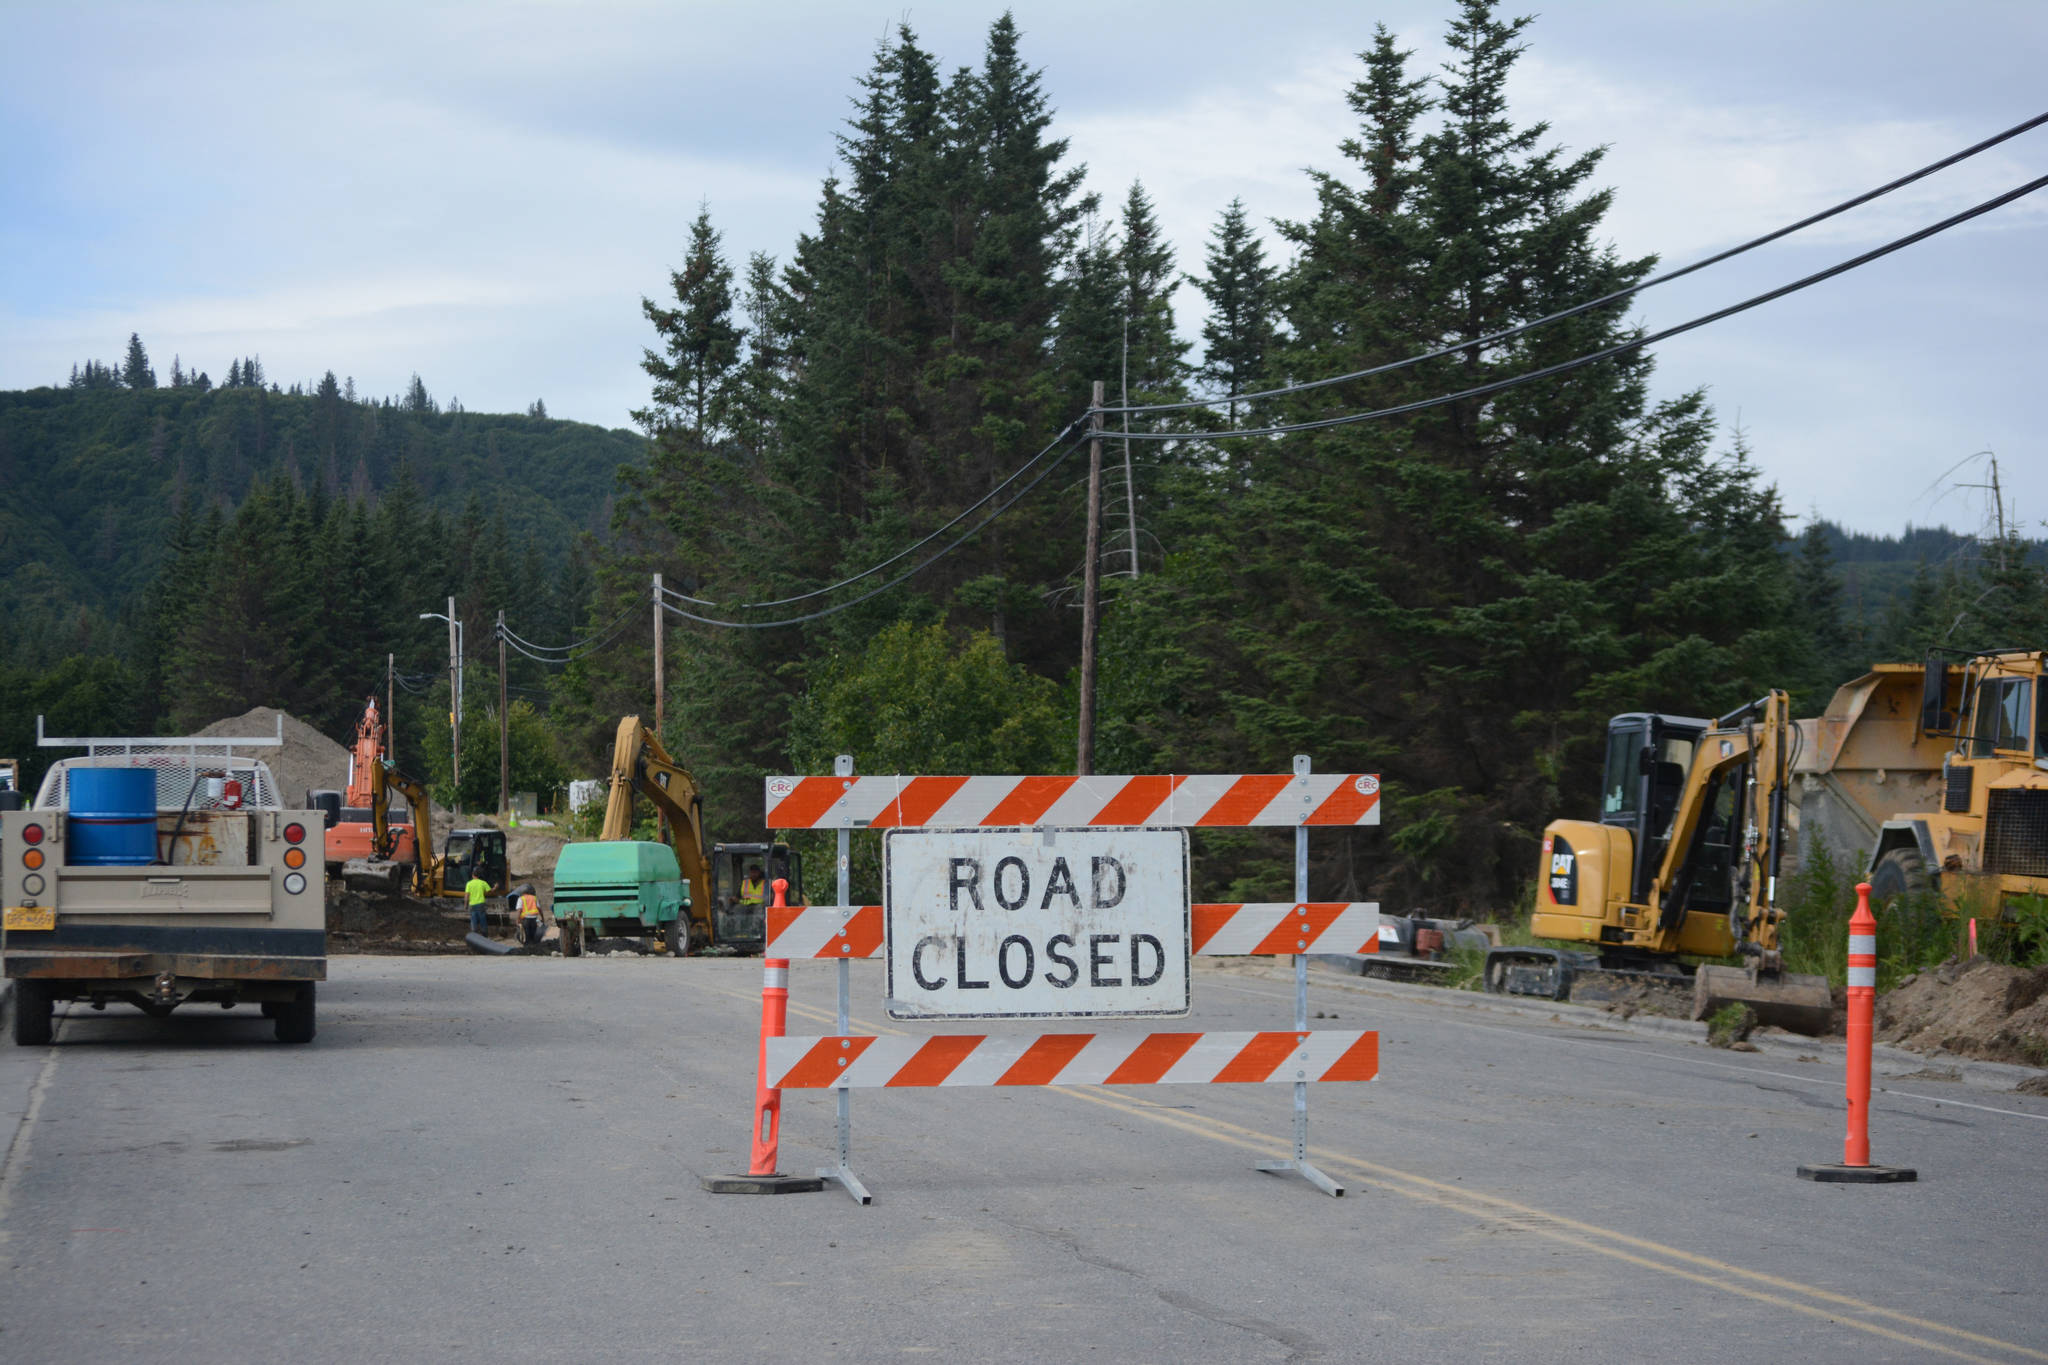 Crews with Clark Management of Anchor Point work on the Greatland Street extension near Sav-U-More on Wednesday, Aug. 1, 2018, in Homer, Alaska. The almost $600,000 project will connect Pioneer Avenue and the Homer Bypass through Greatland Street. (Homer News file photo)